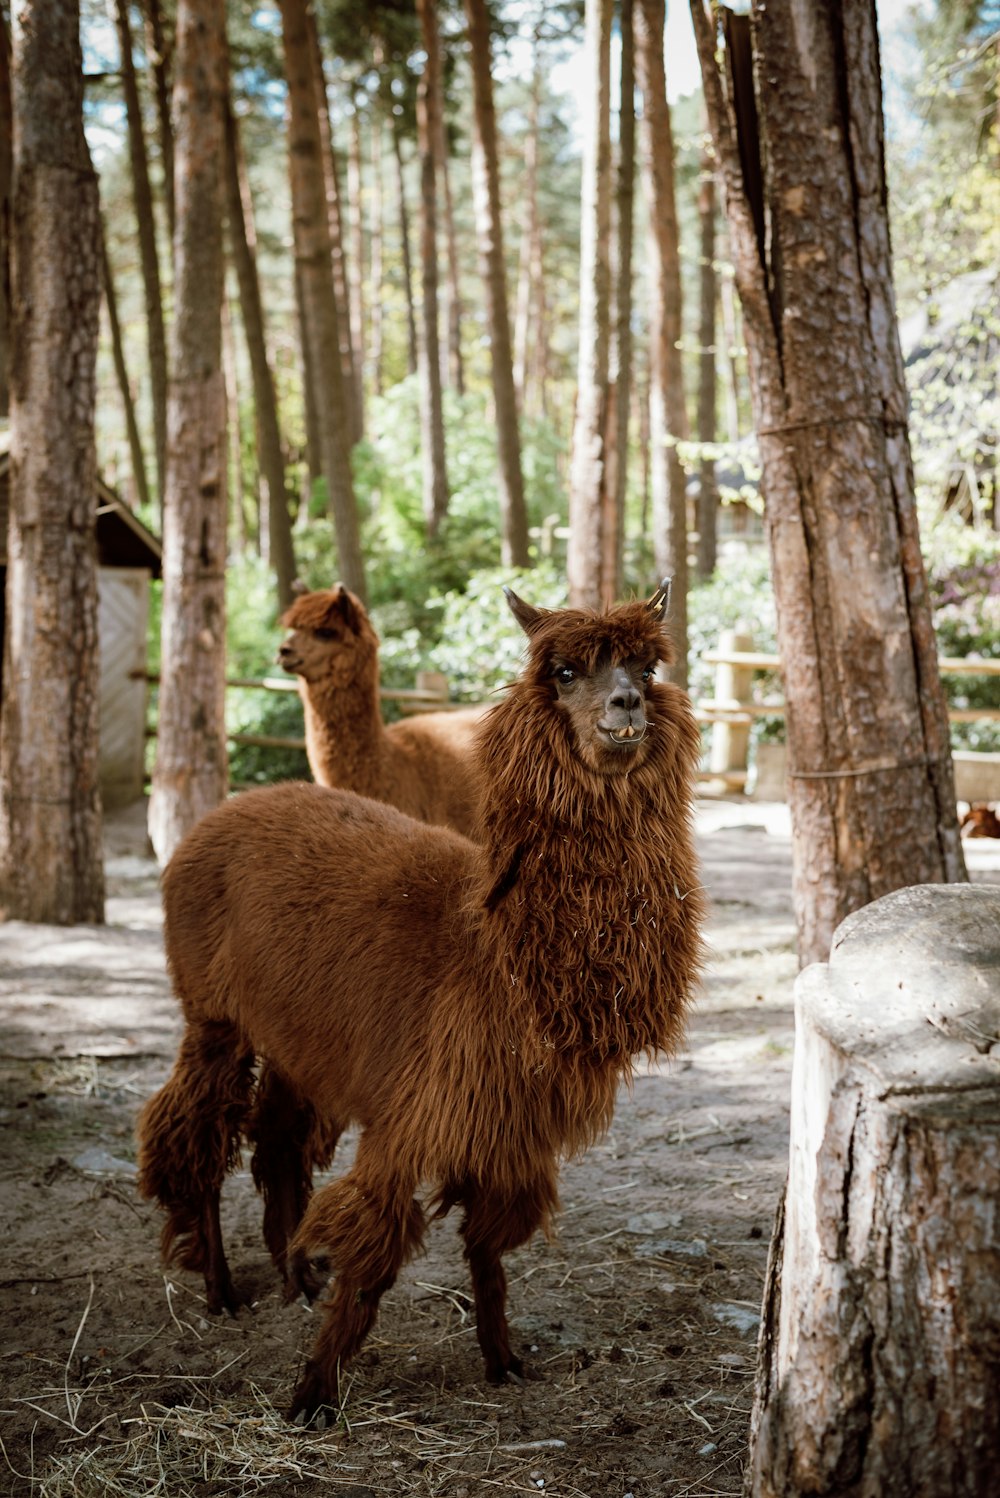 a couple of llamas standing next to each other in a forest